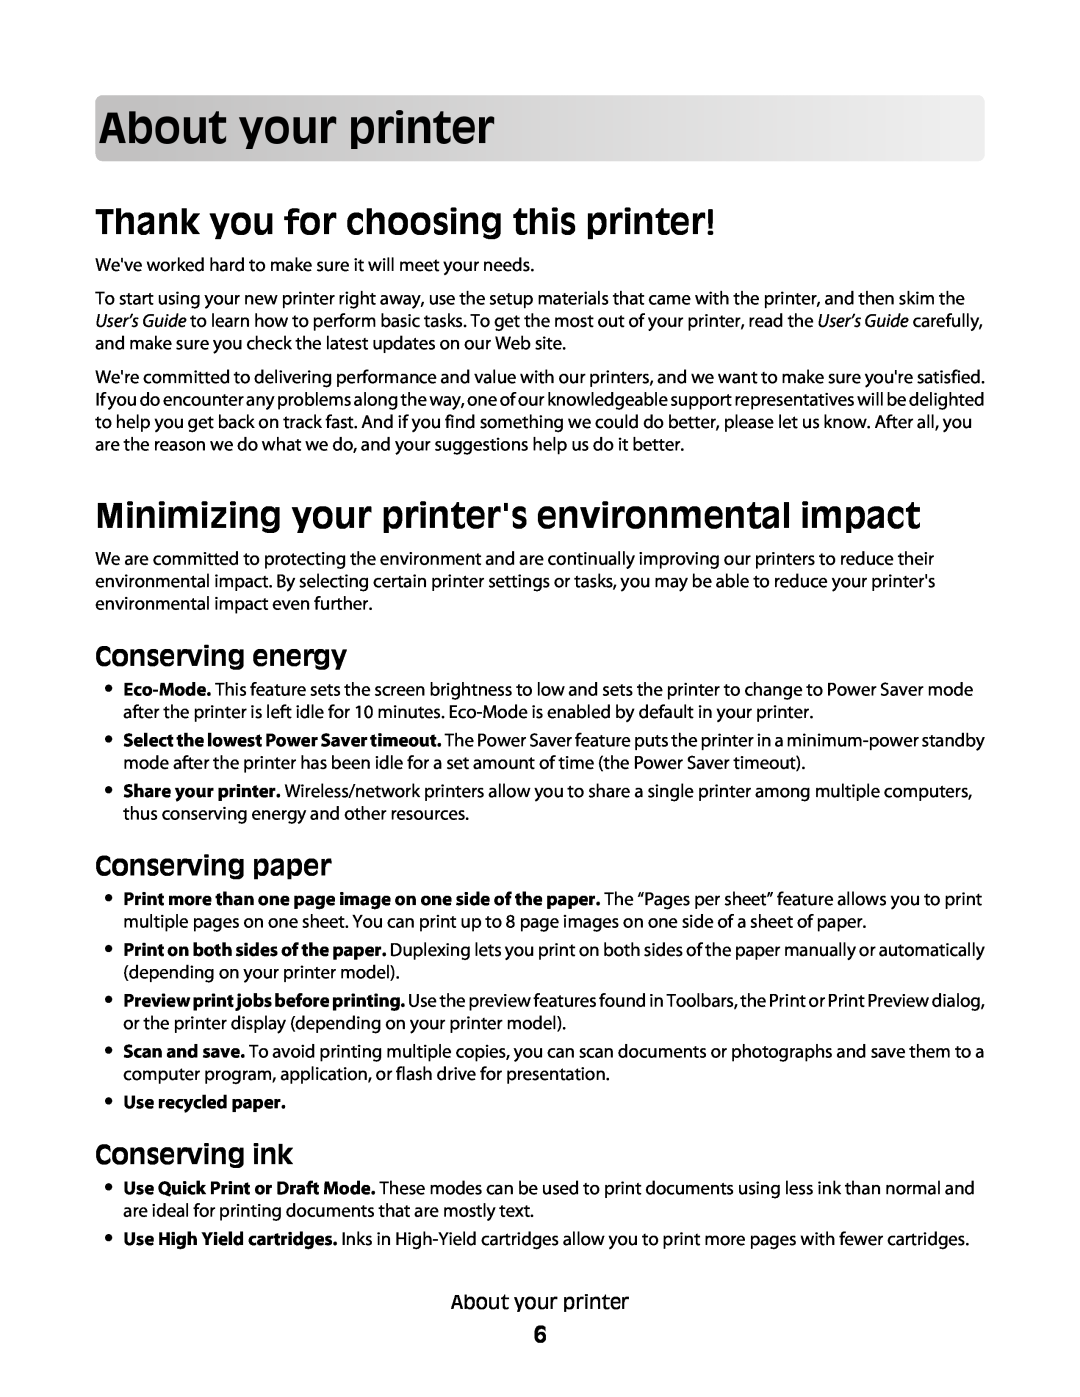 Lexmark 101, 10E About your printer, Thank you for choosing this printer, Minimizing your printers environmental impact 